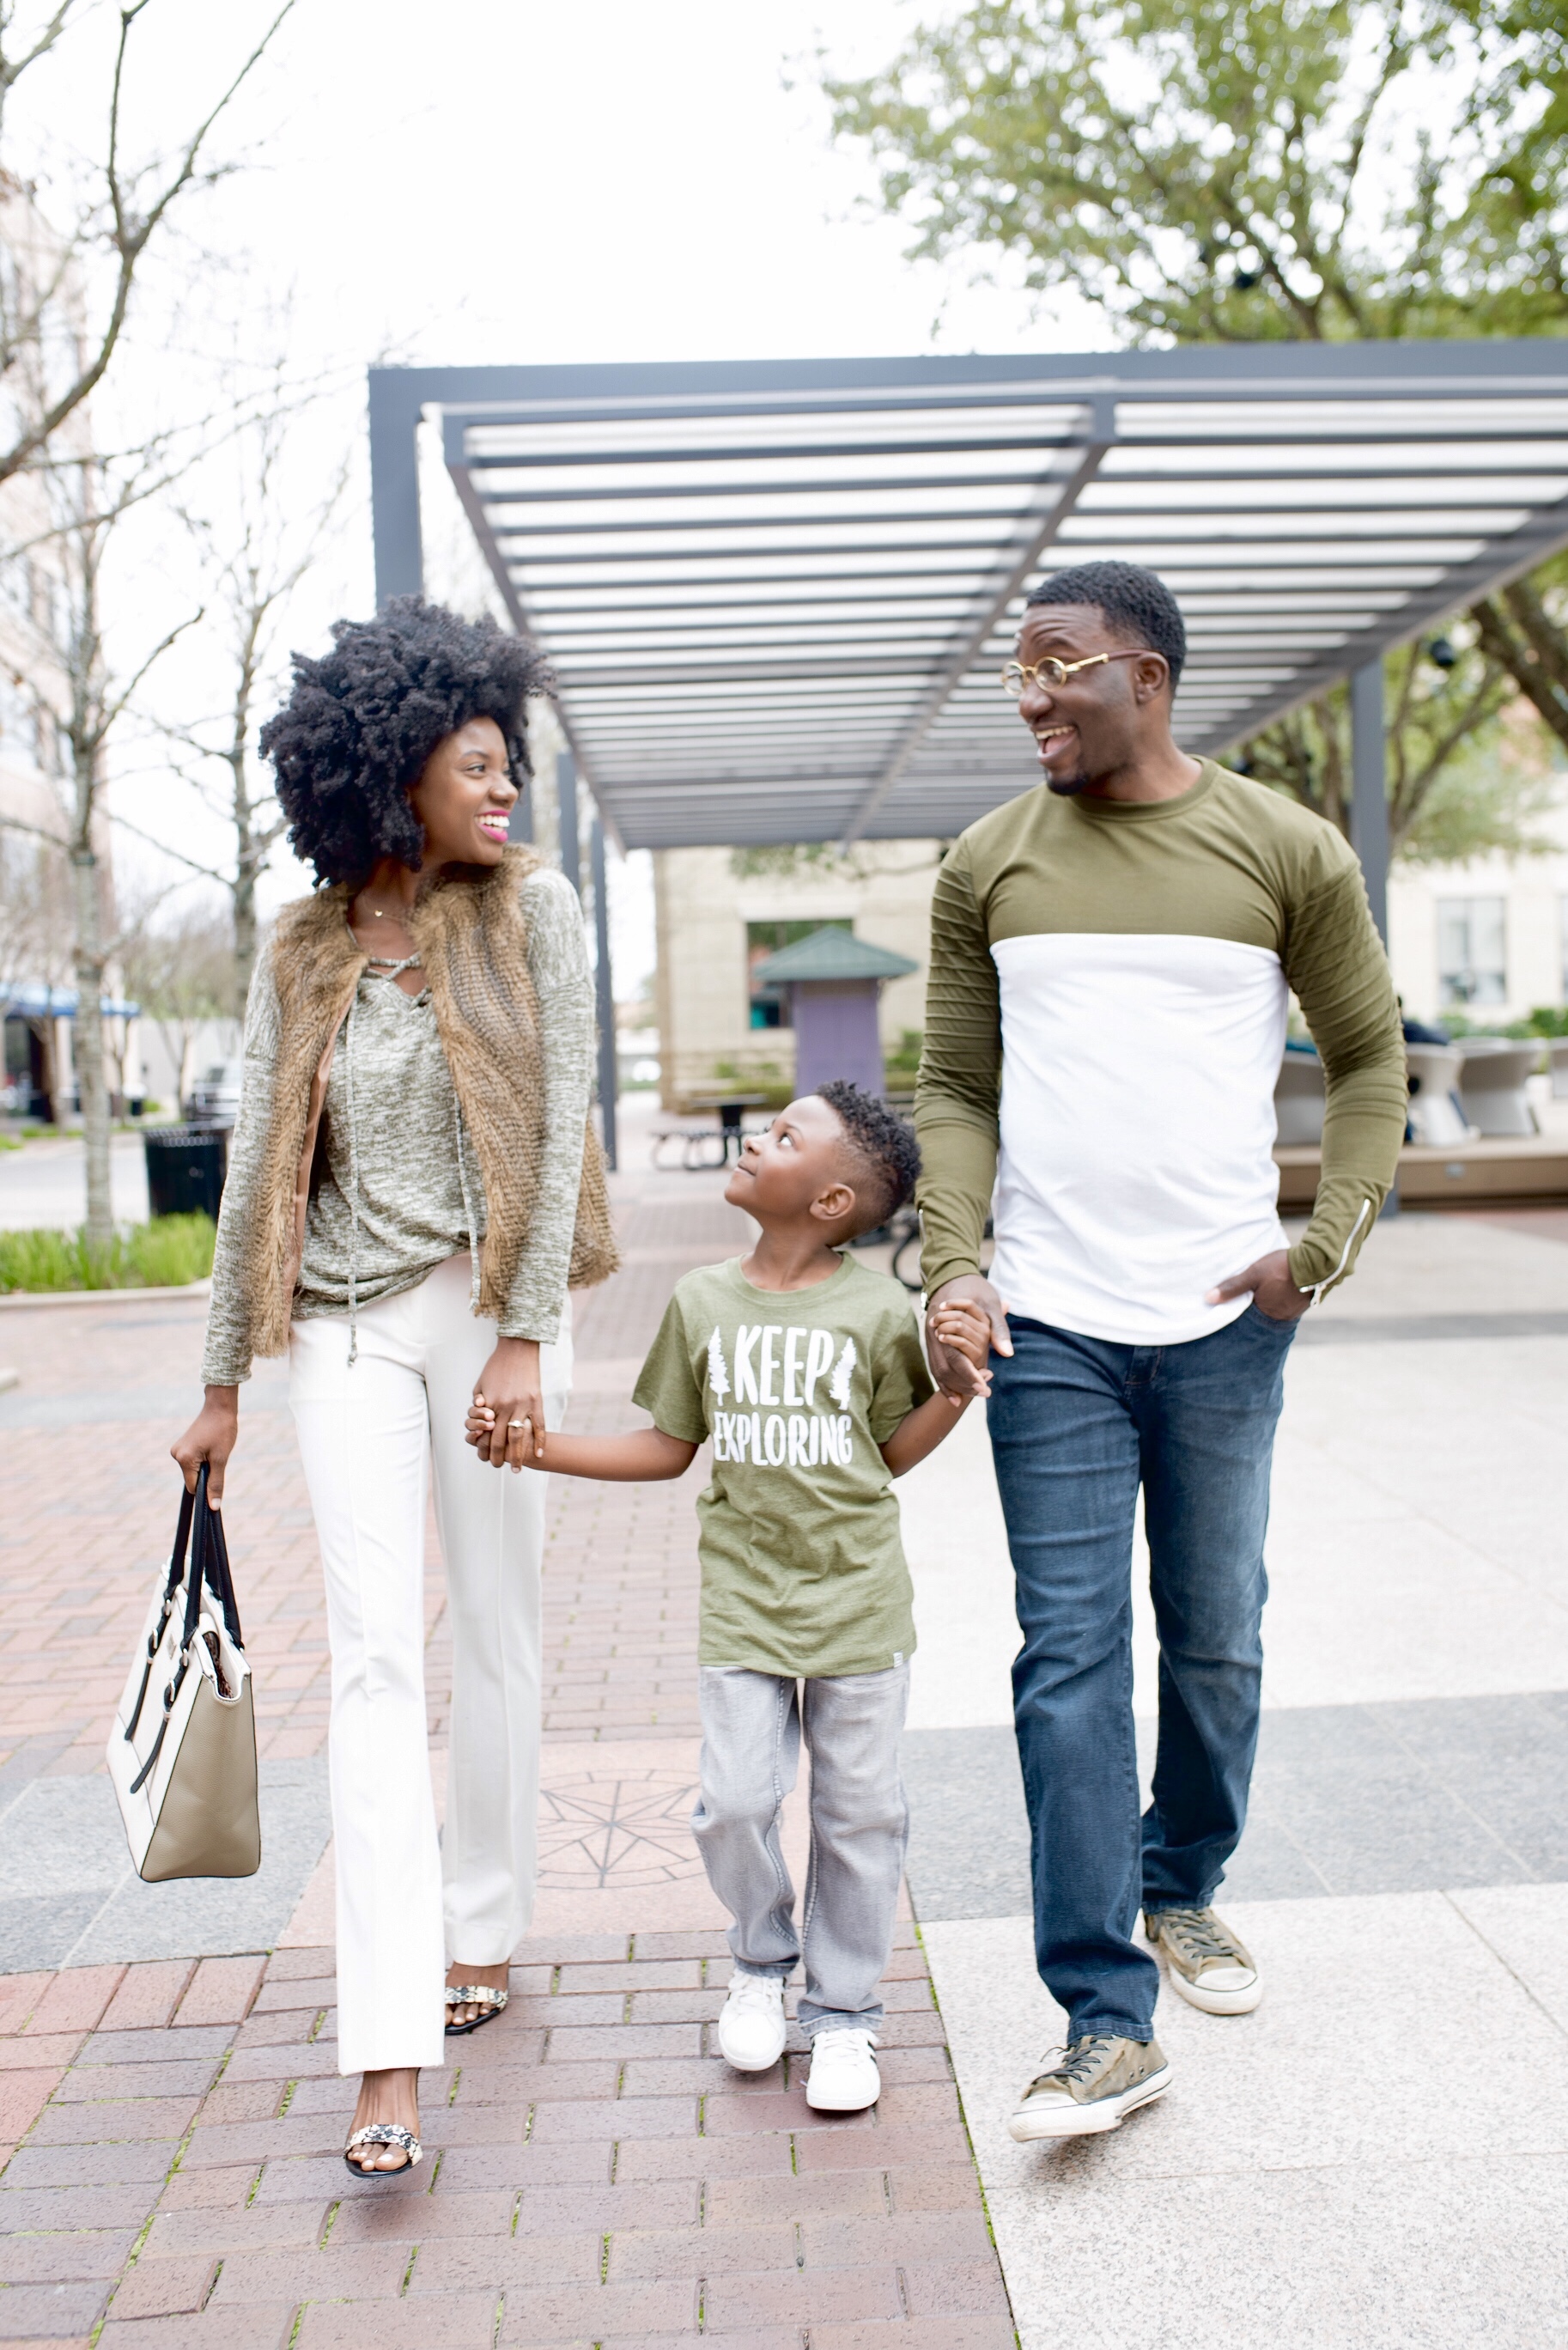 black family, family photo ideas, valentines day, family fun night, family date night, outfit ideas for family photos, 4c hair, 4b hair, 4a hair, olive family outfits, black model family, black love, valentines day outfit